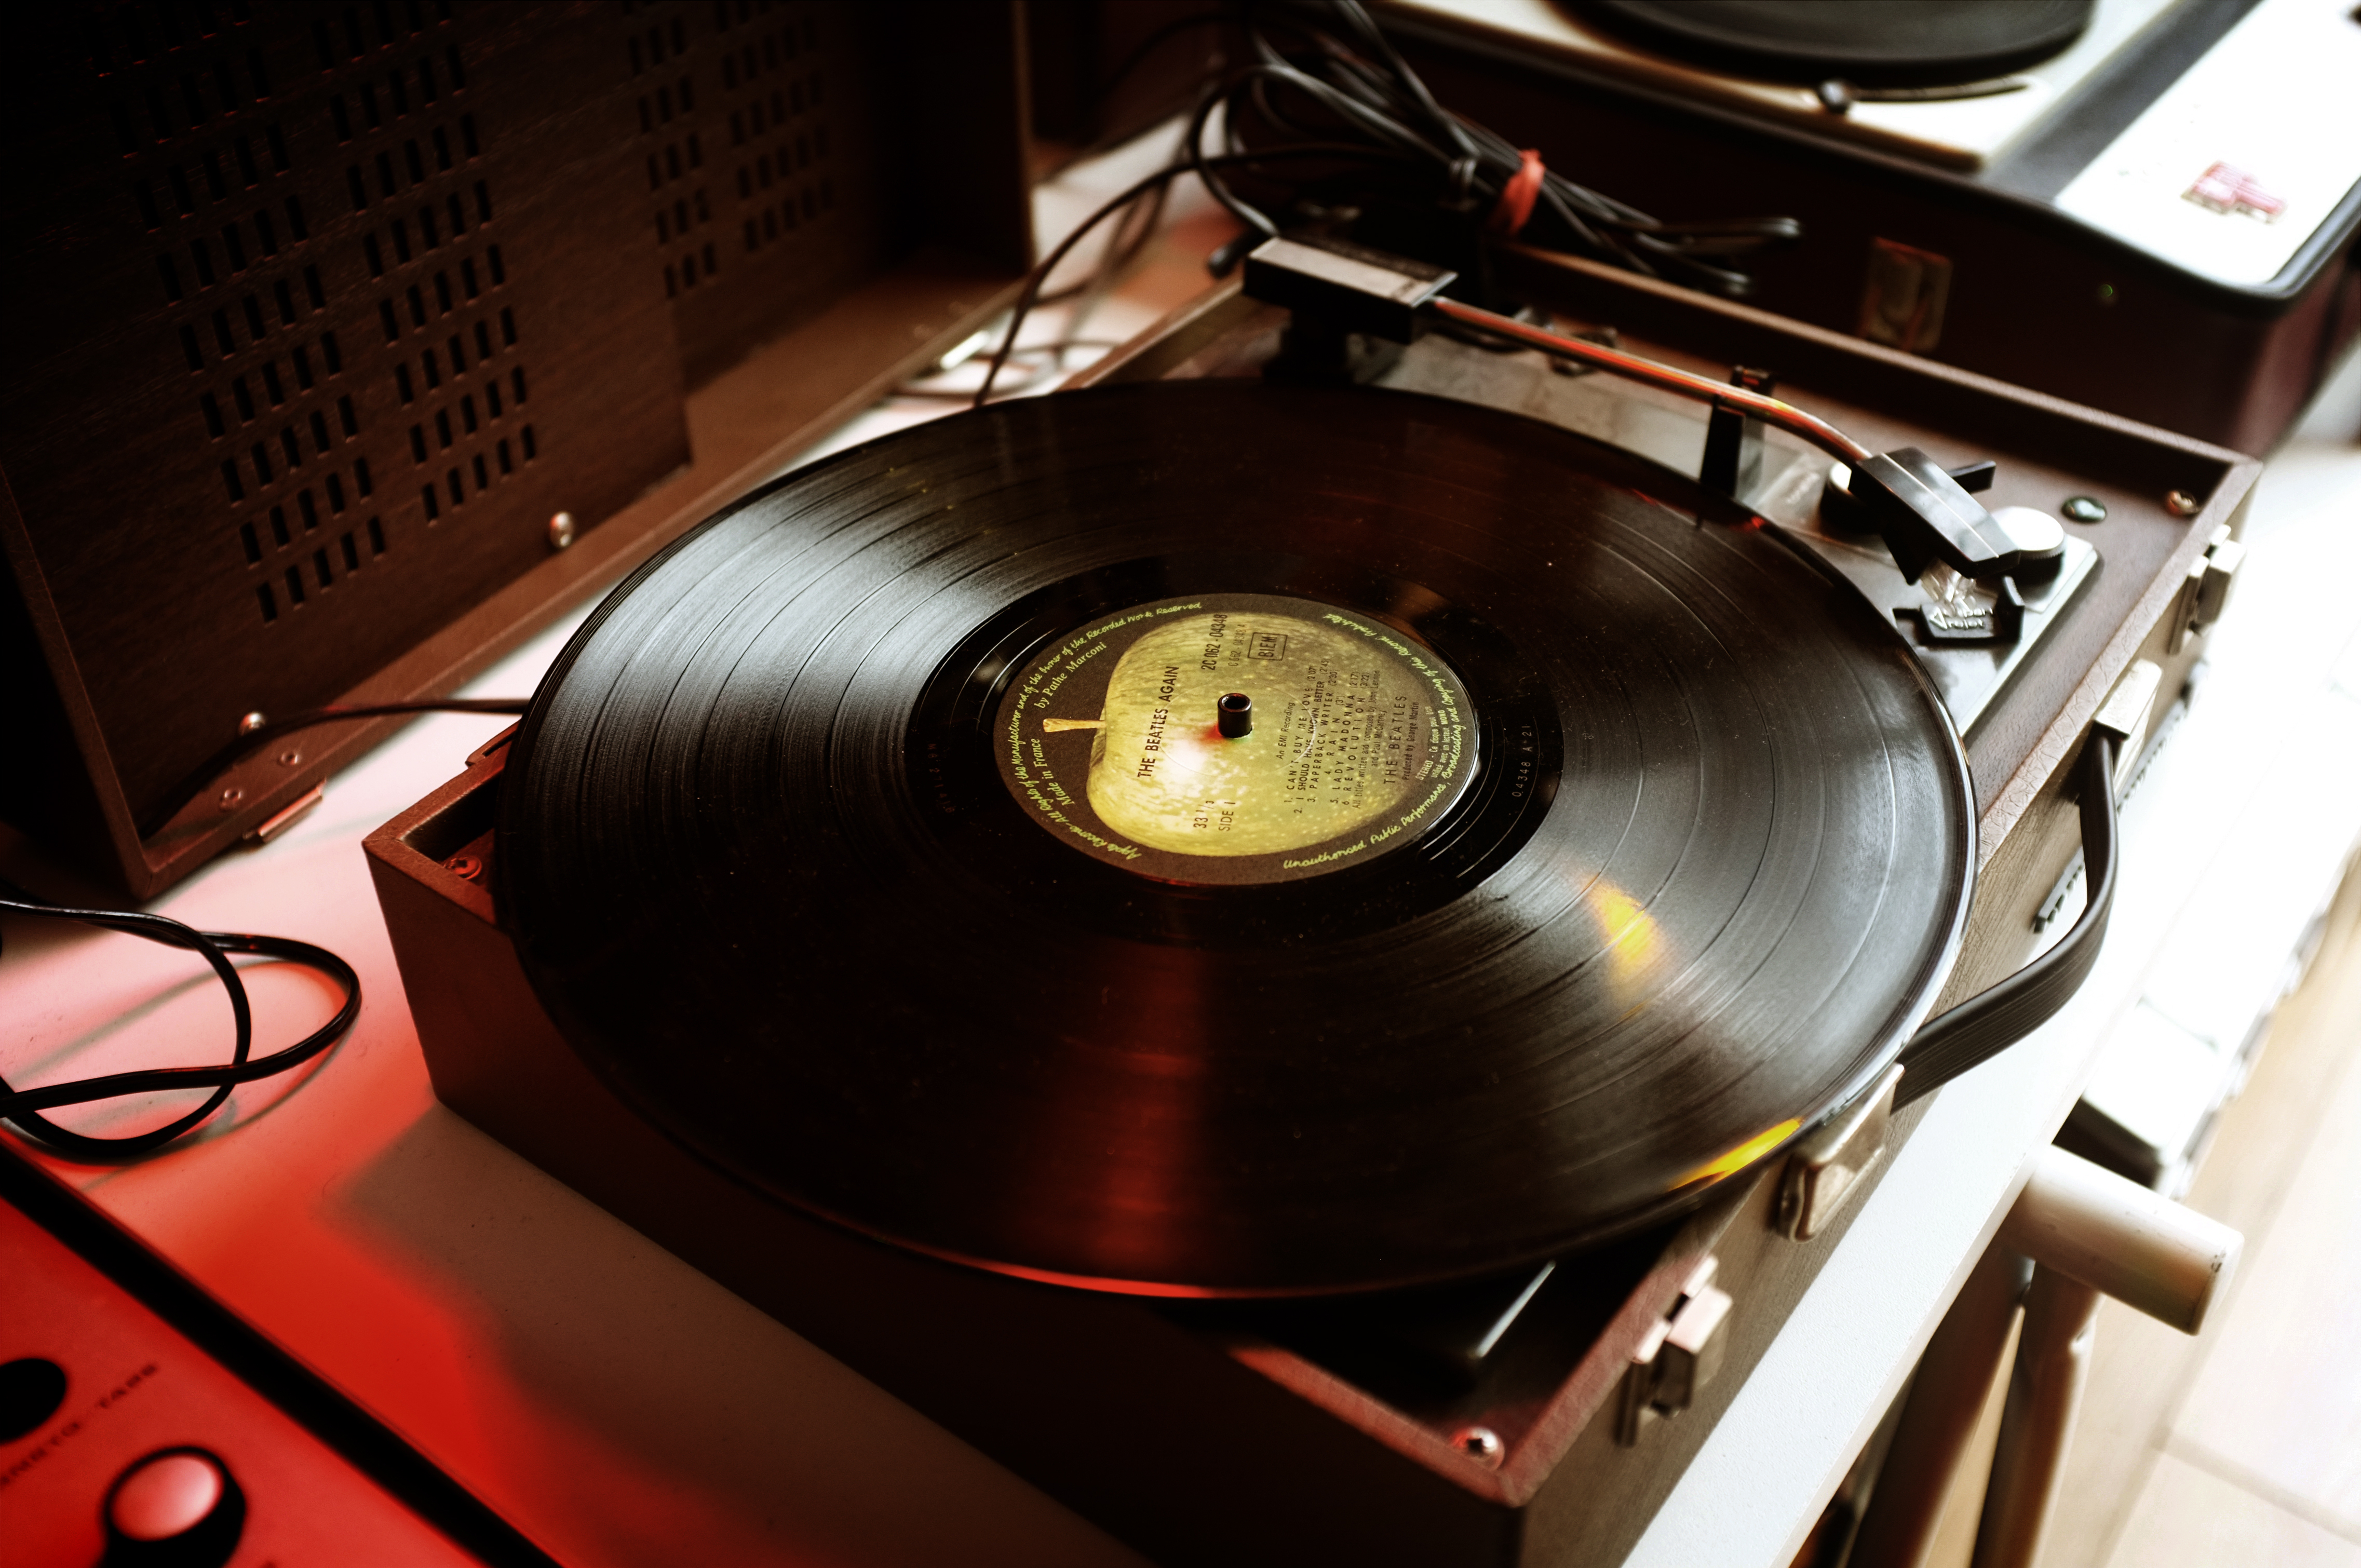 51504 download wallpaper music, plate, vinyl player screensavers and pictures for free